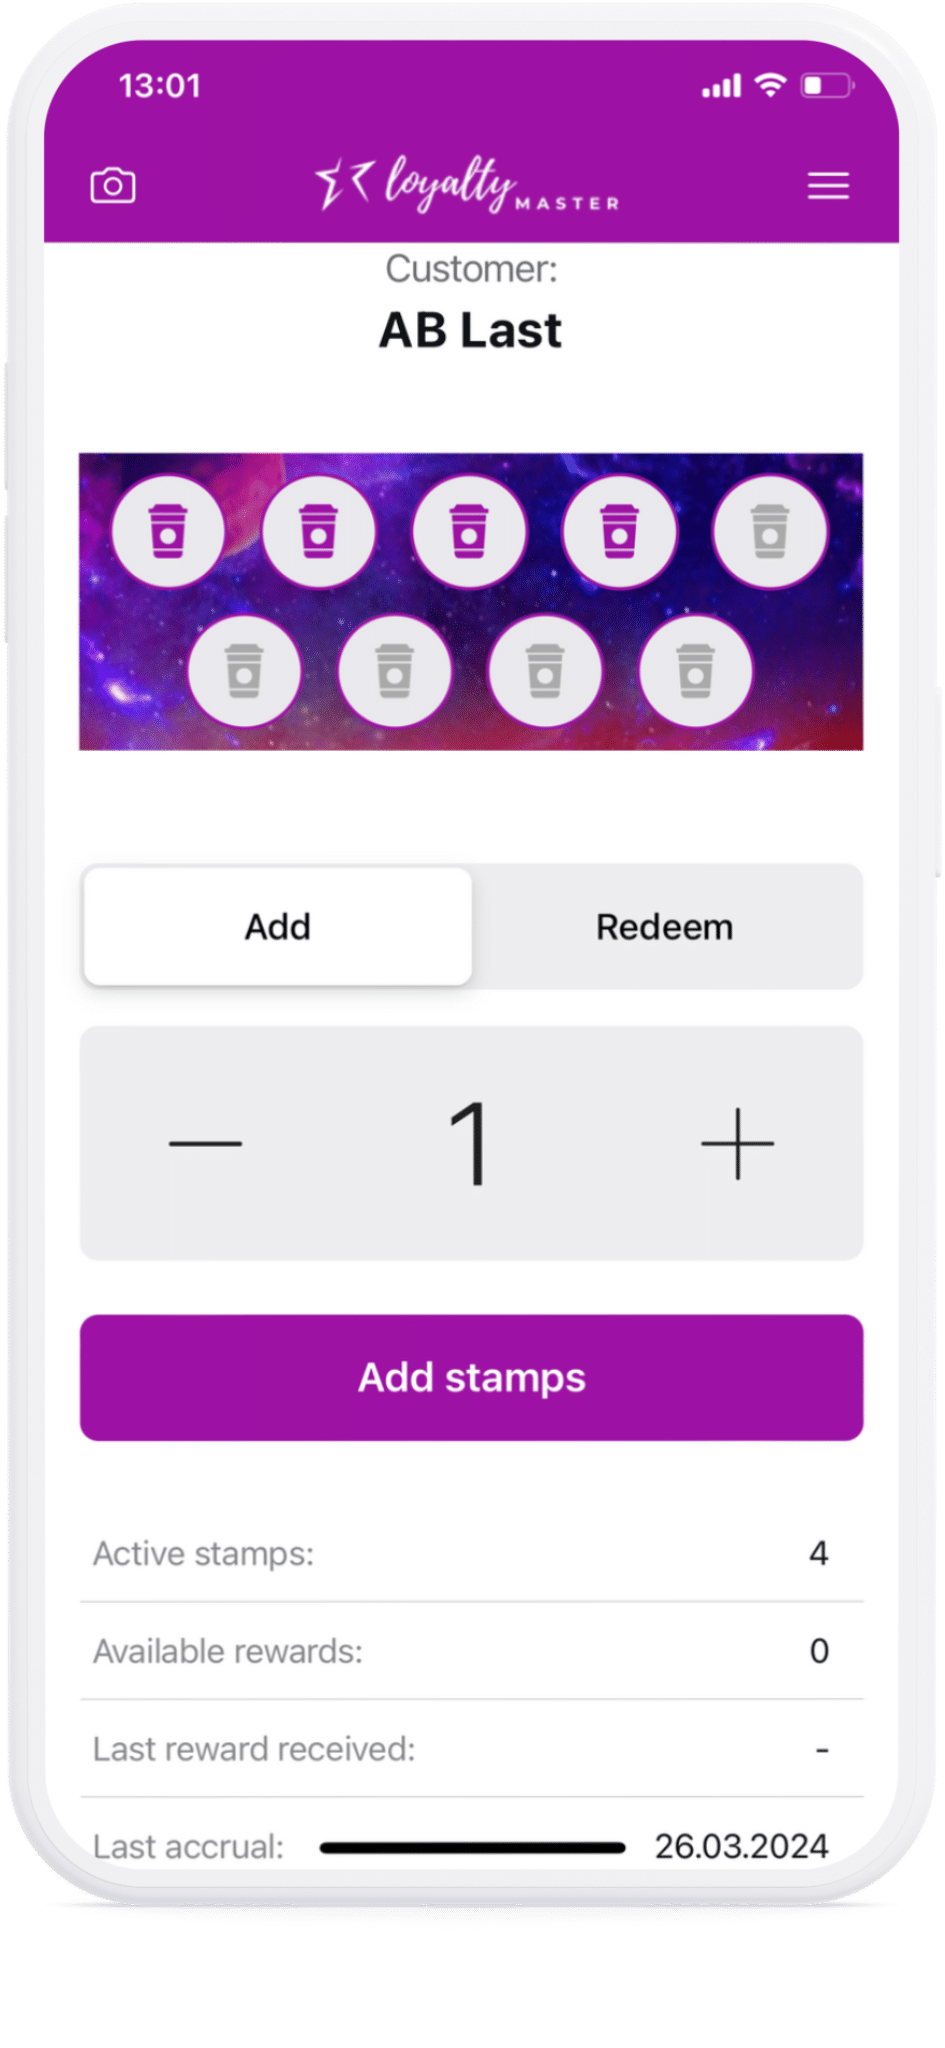 Mobile screen displaying a loyalty card application with options to add or redeem points and a summary of customer's active stamps and last reward received.